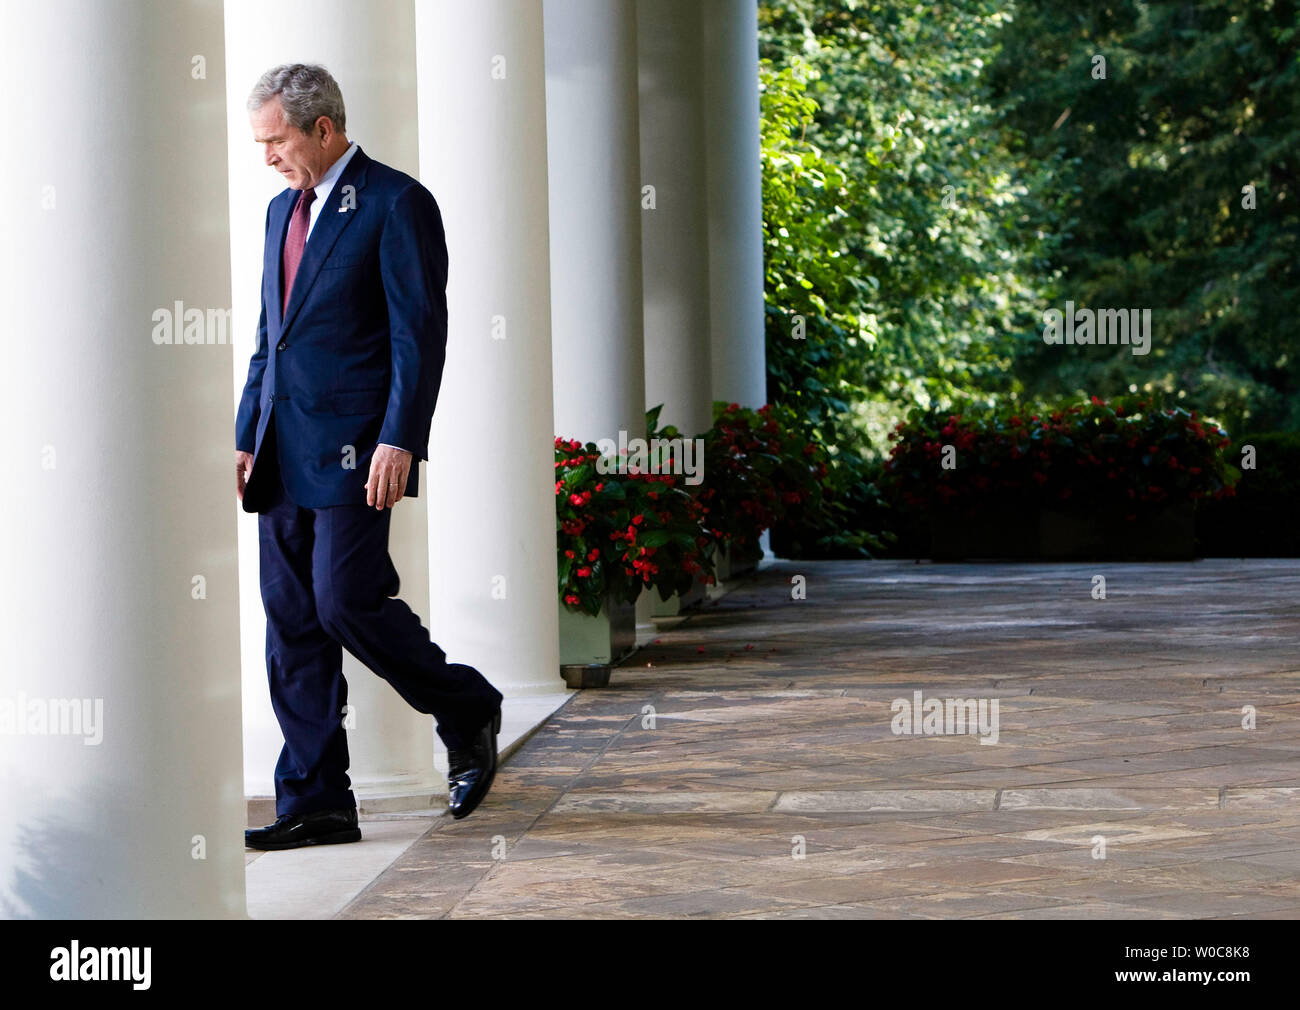 U.S. President George W. Bush walks through the Colonnade to the Rose Garden to deliver remarks on the conflict between Georgia and Russia at the White House in Washington on August 11, 2008. Bush condemned the bombings by Russia in an escalation of the conflict over the South Ossetian region of Georgia. (UPI Photo/Patrick D. McDermott) Stock Photo